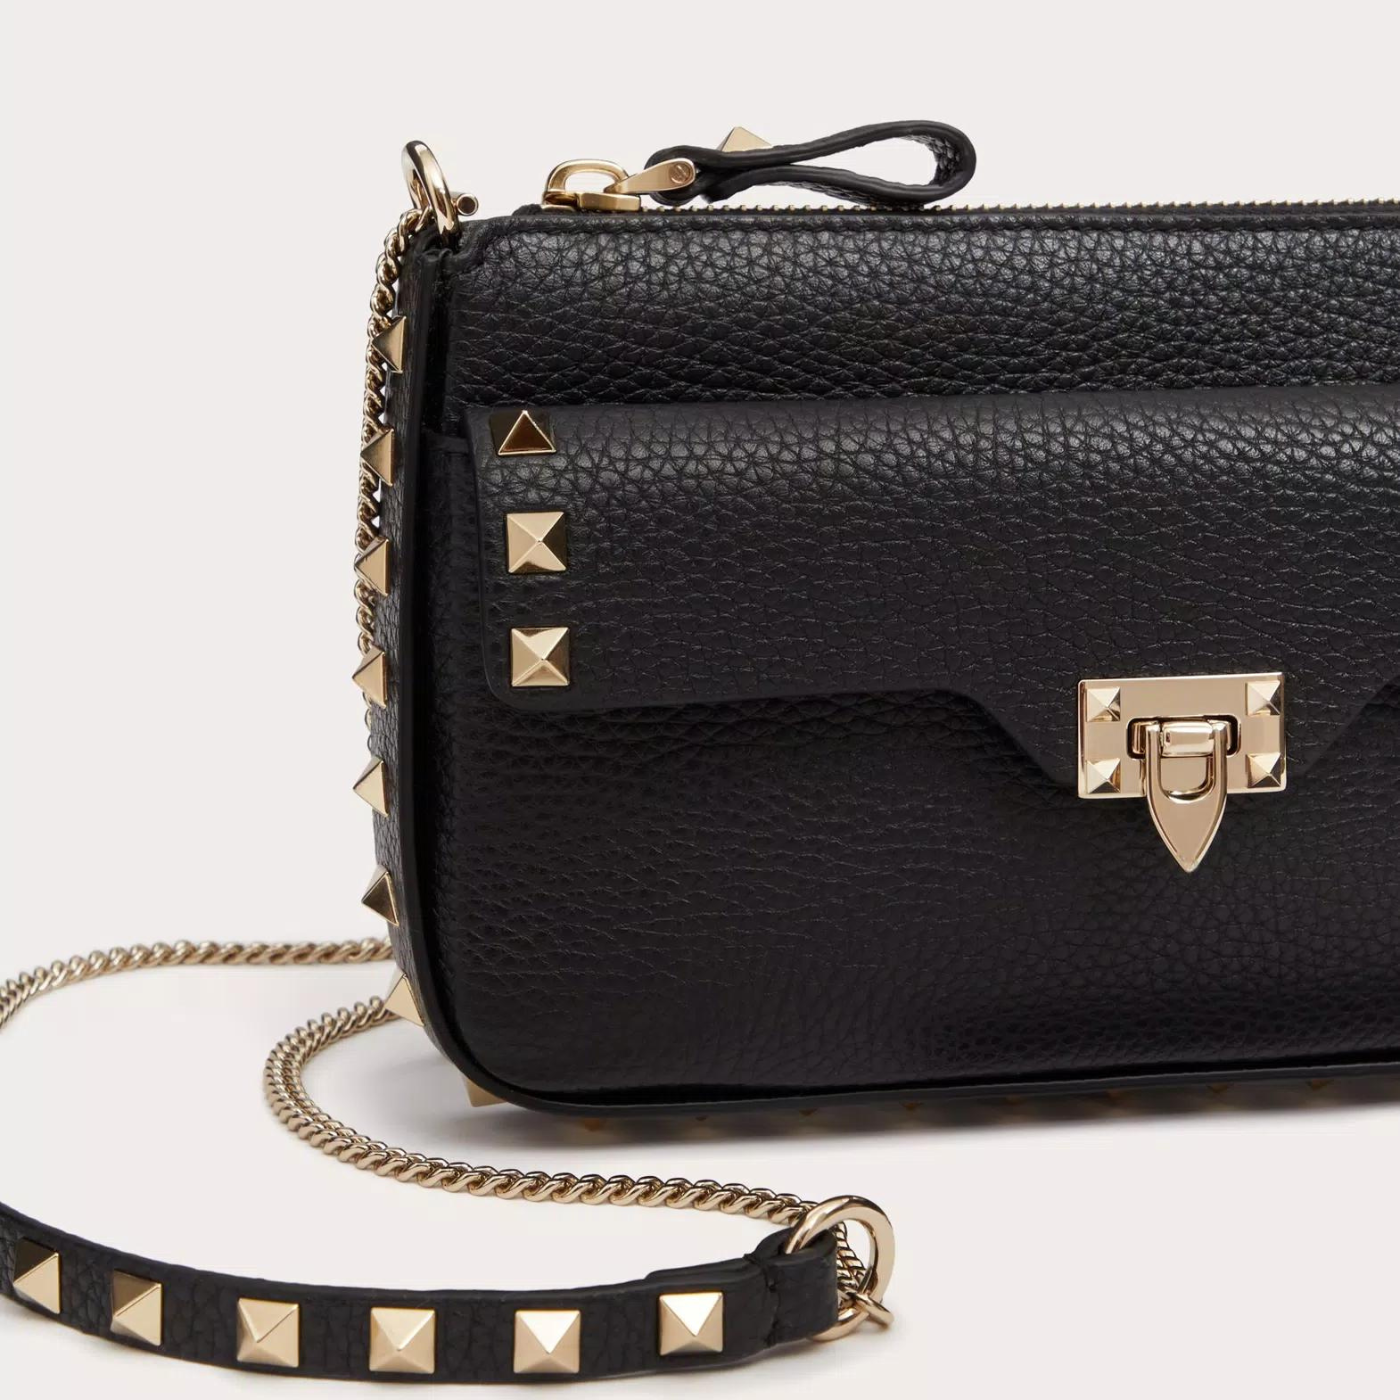 Rockstud Pouch with Chain in Black Handbags VALENTINO - LOLAMIR